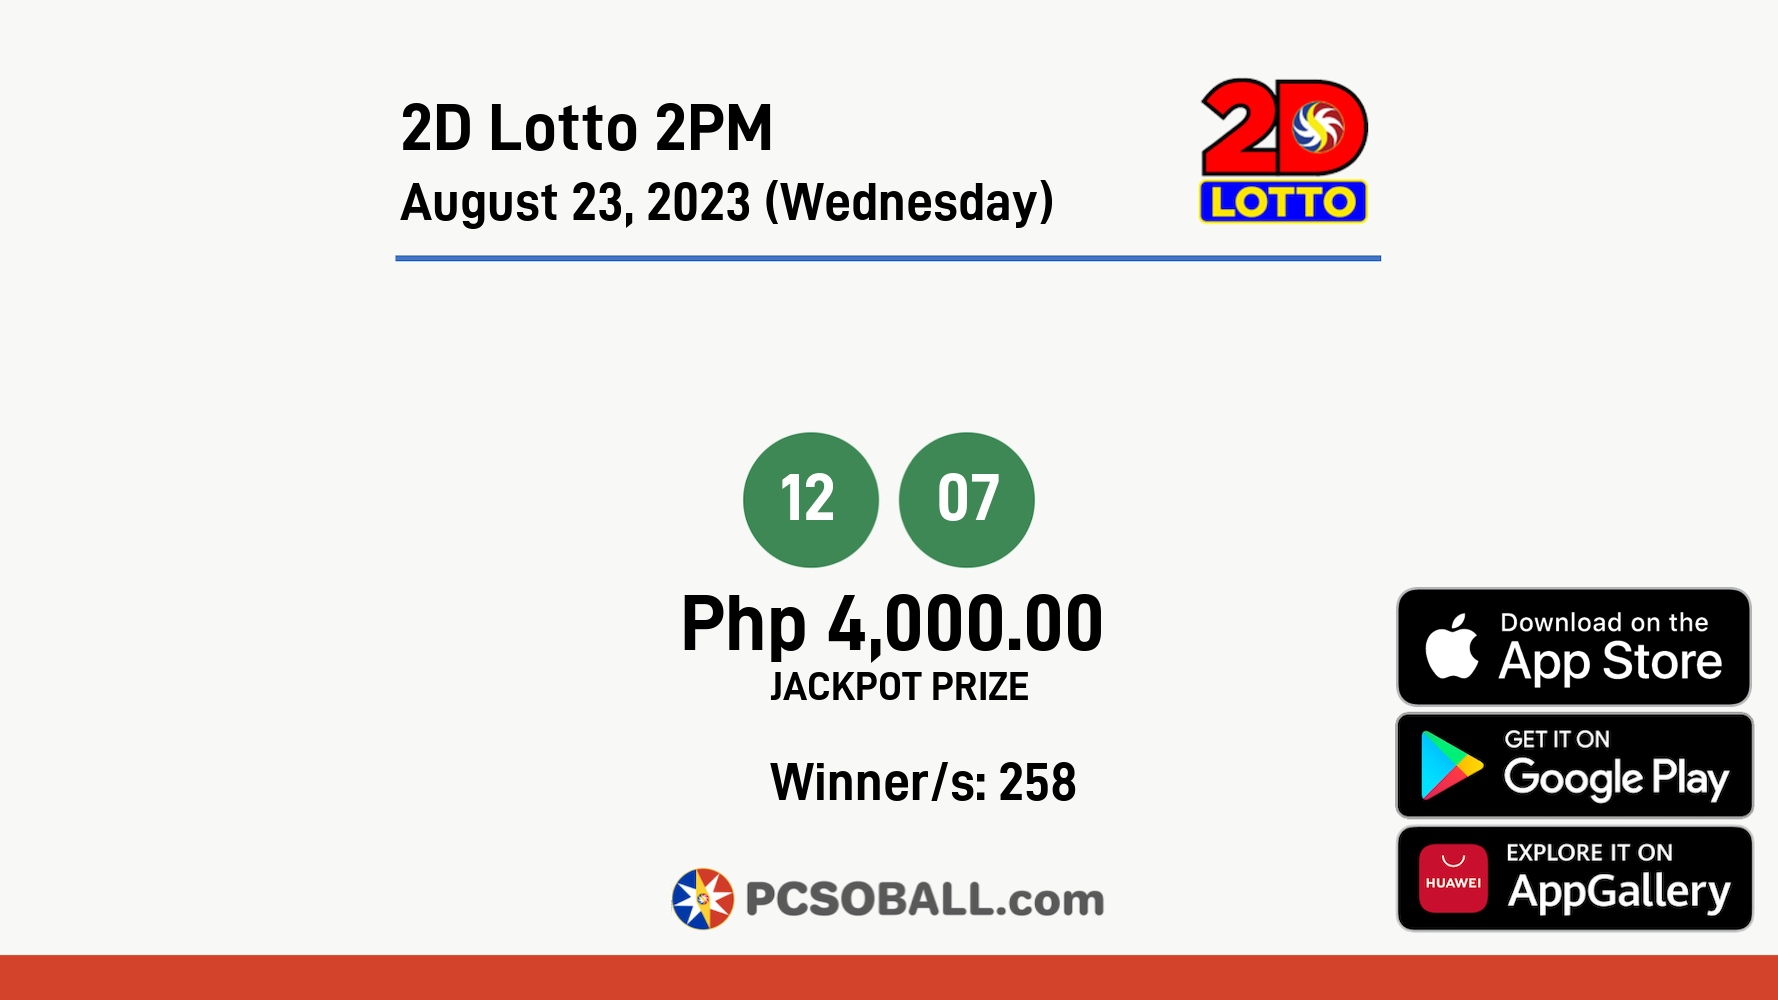 2D Lotto 2PM August 23, 2023 (Wednesday) Result